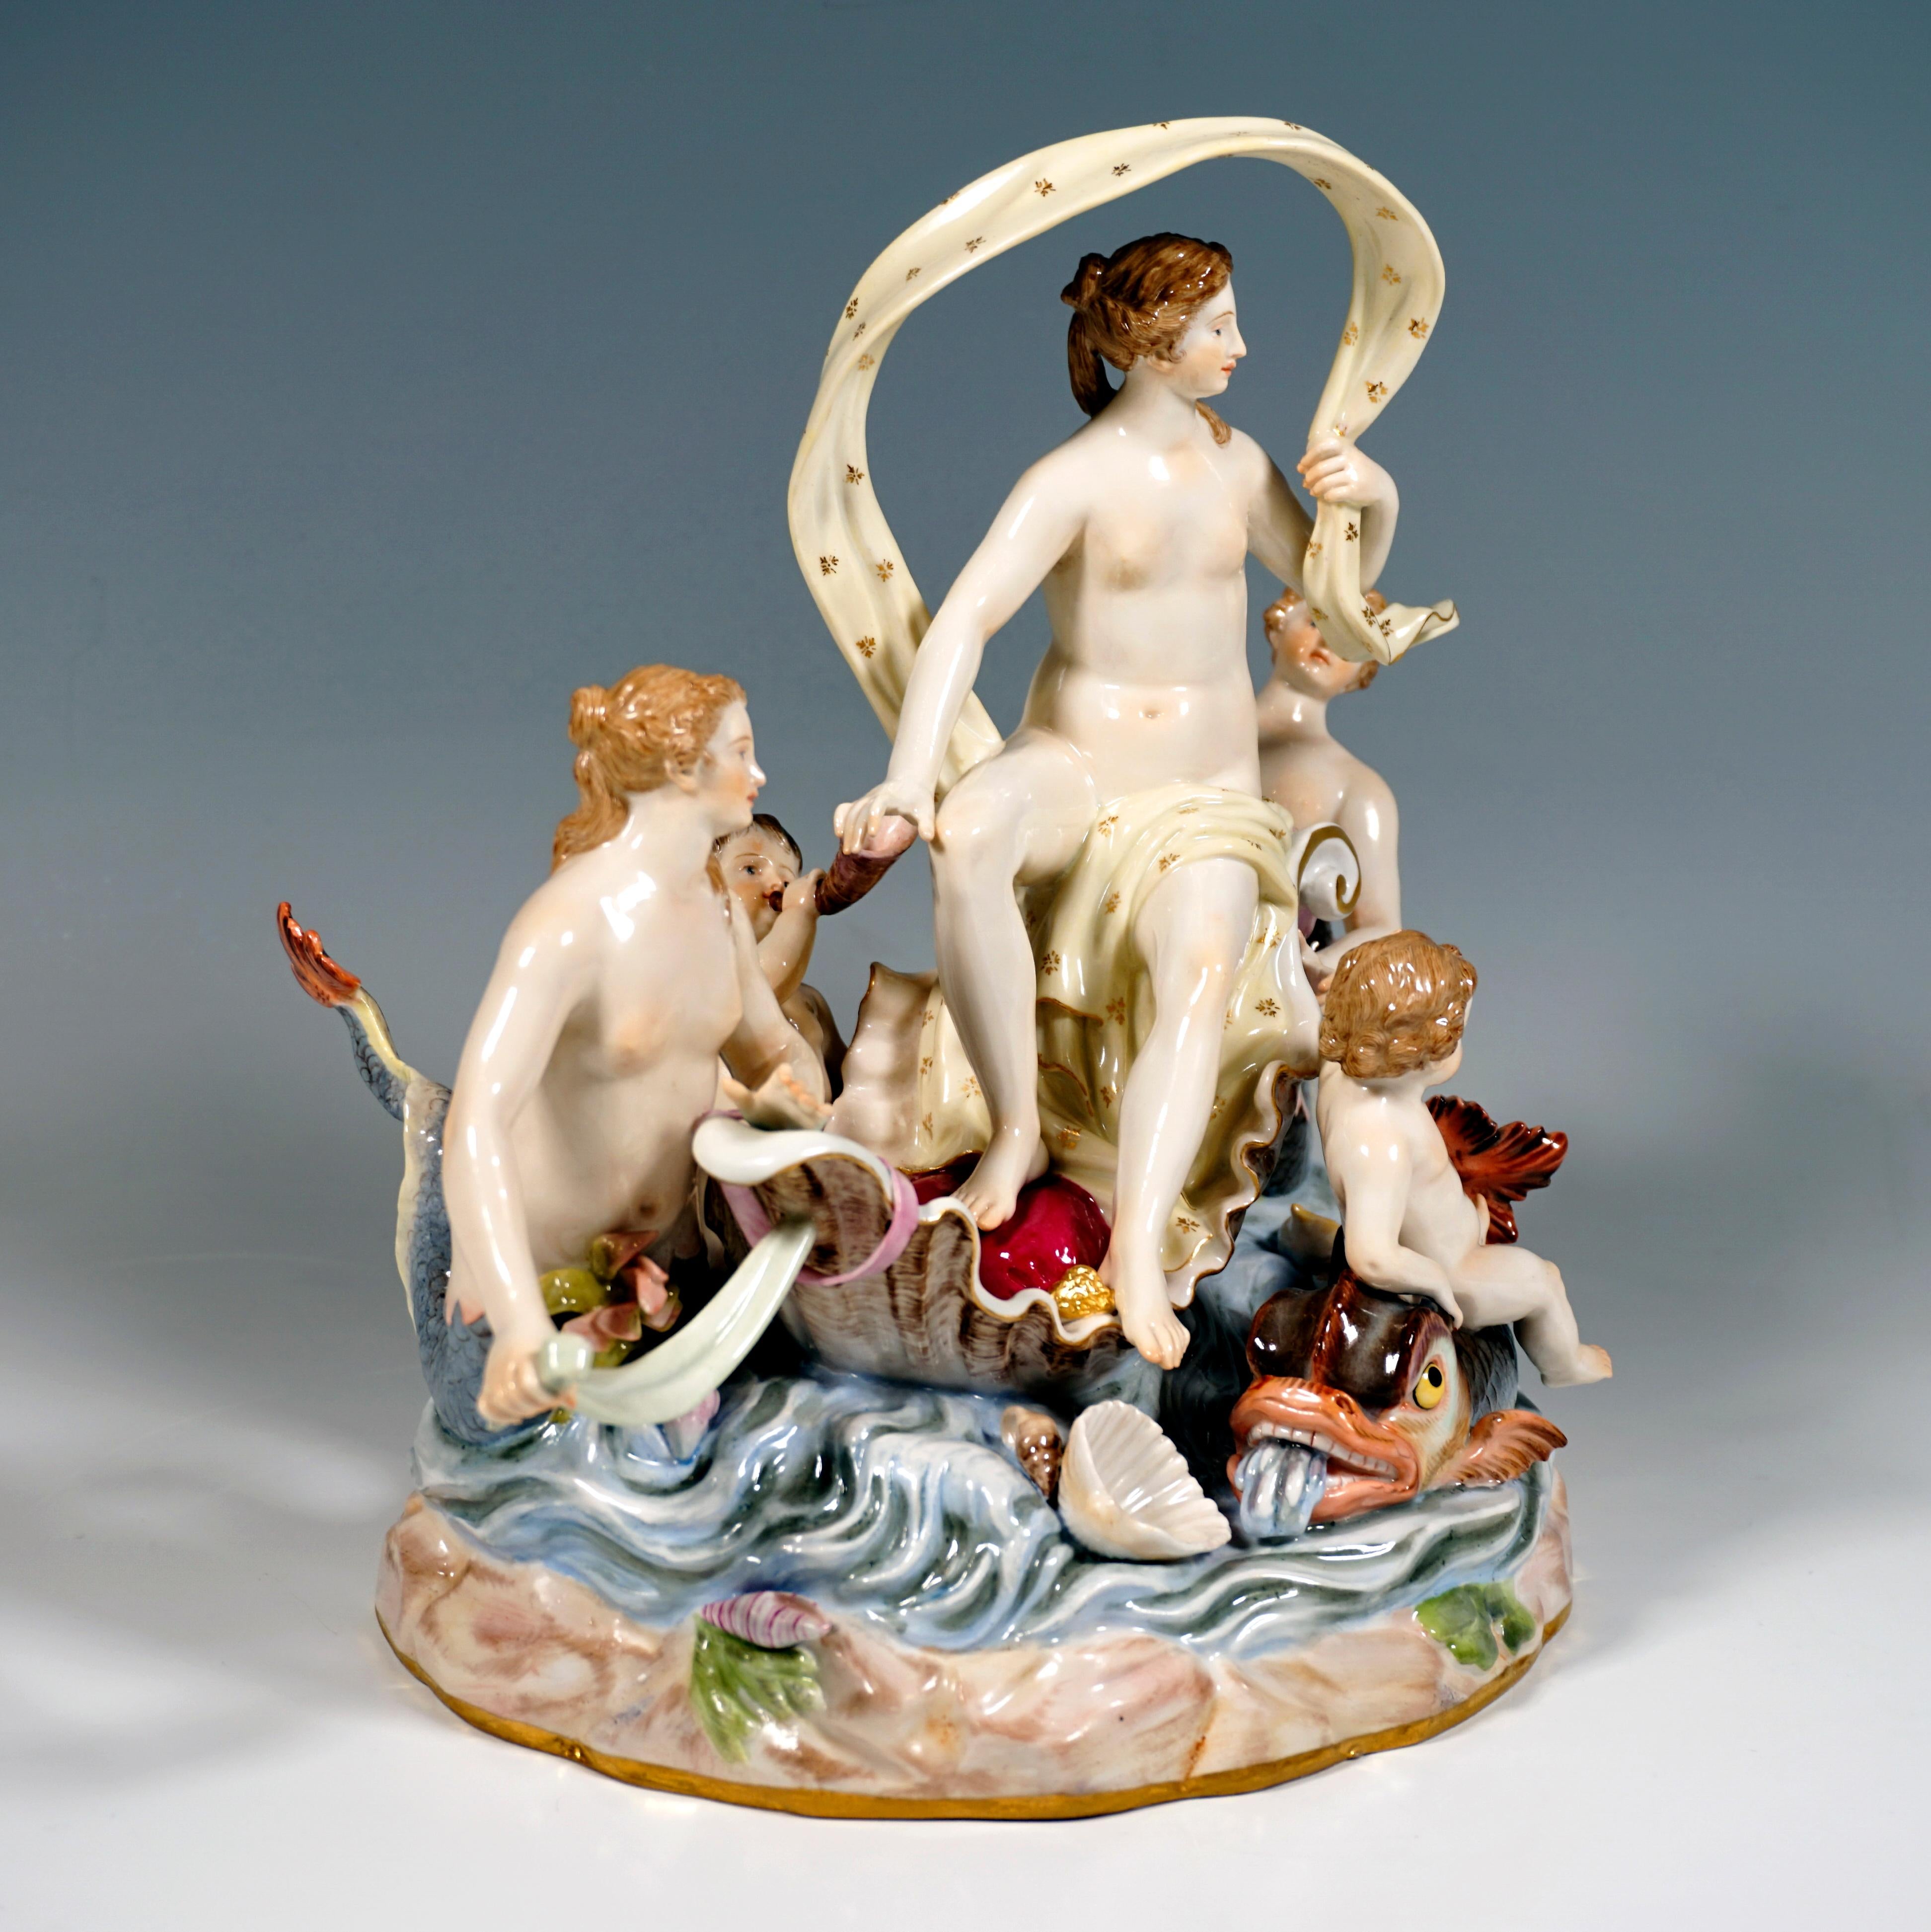 Very rare and delicate Meissen porcelain group of the 19th century:
The nymph, covered only with a cloth, sits on a half shell floating on the water, holding the cloth at one end so that it forms a wavy loop over her body. She is accompanied by